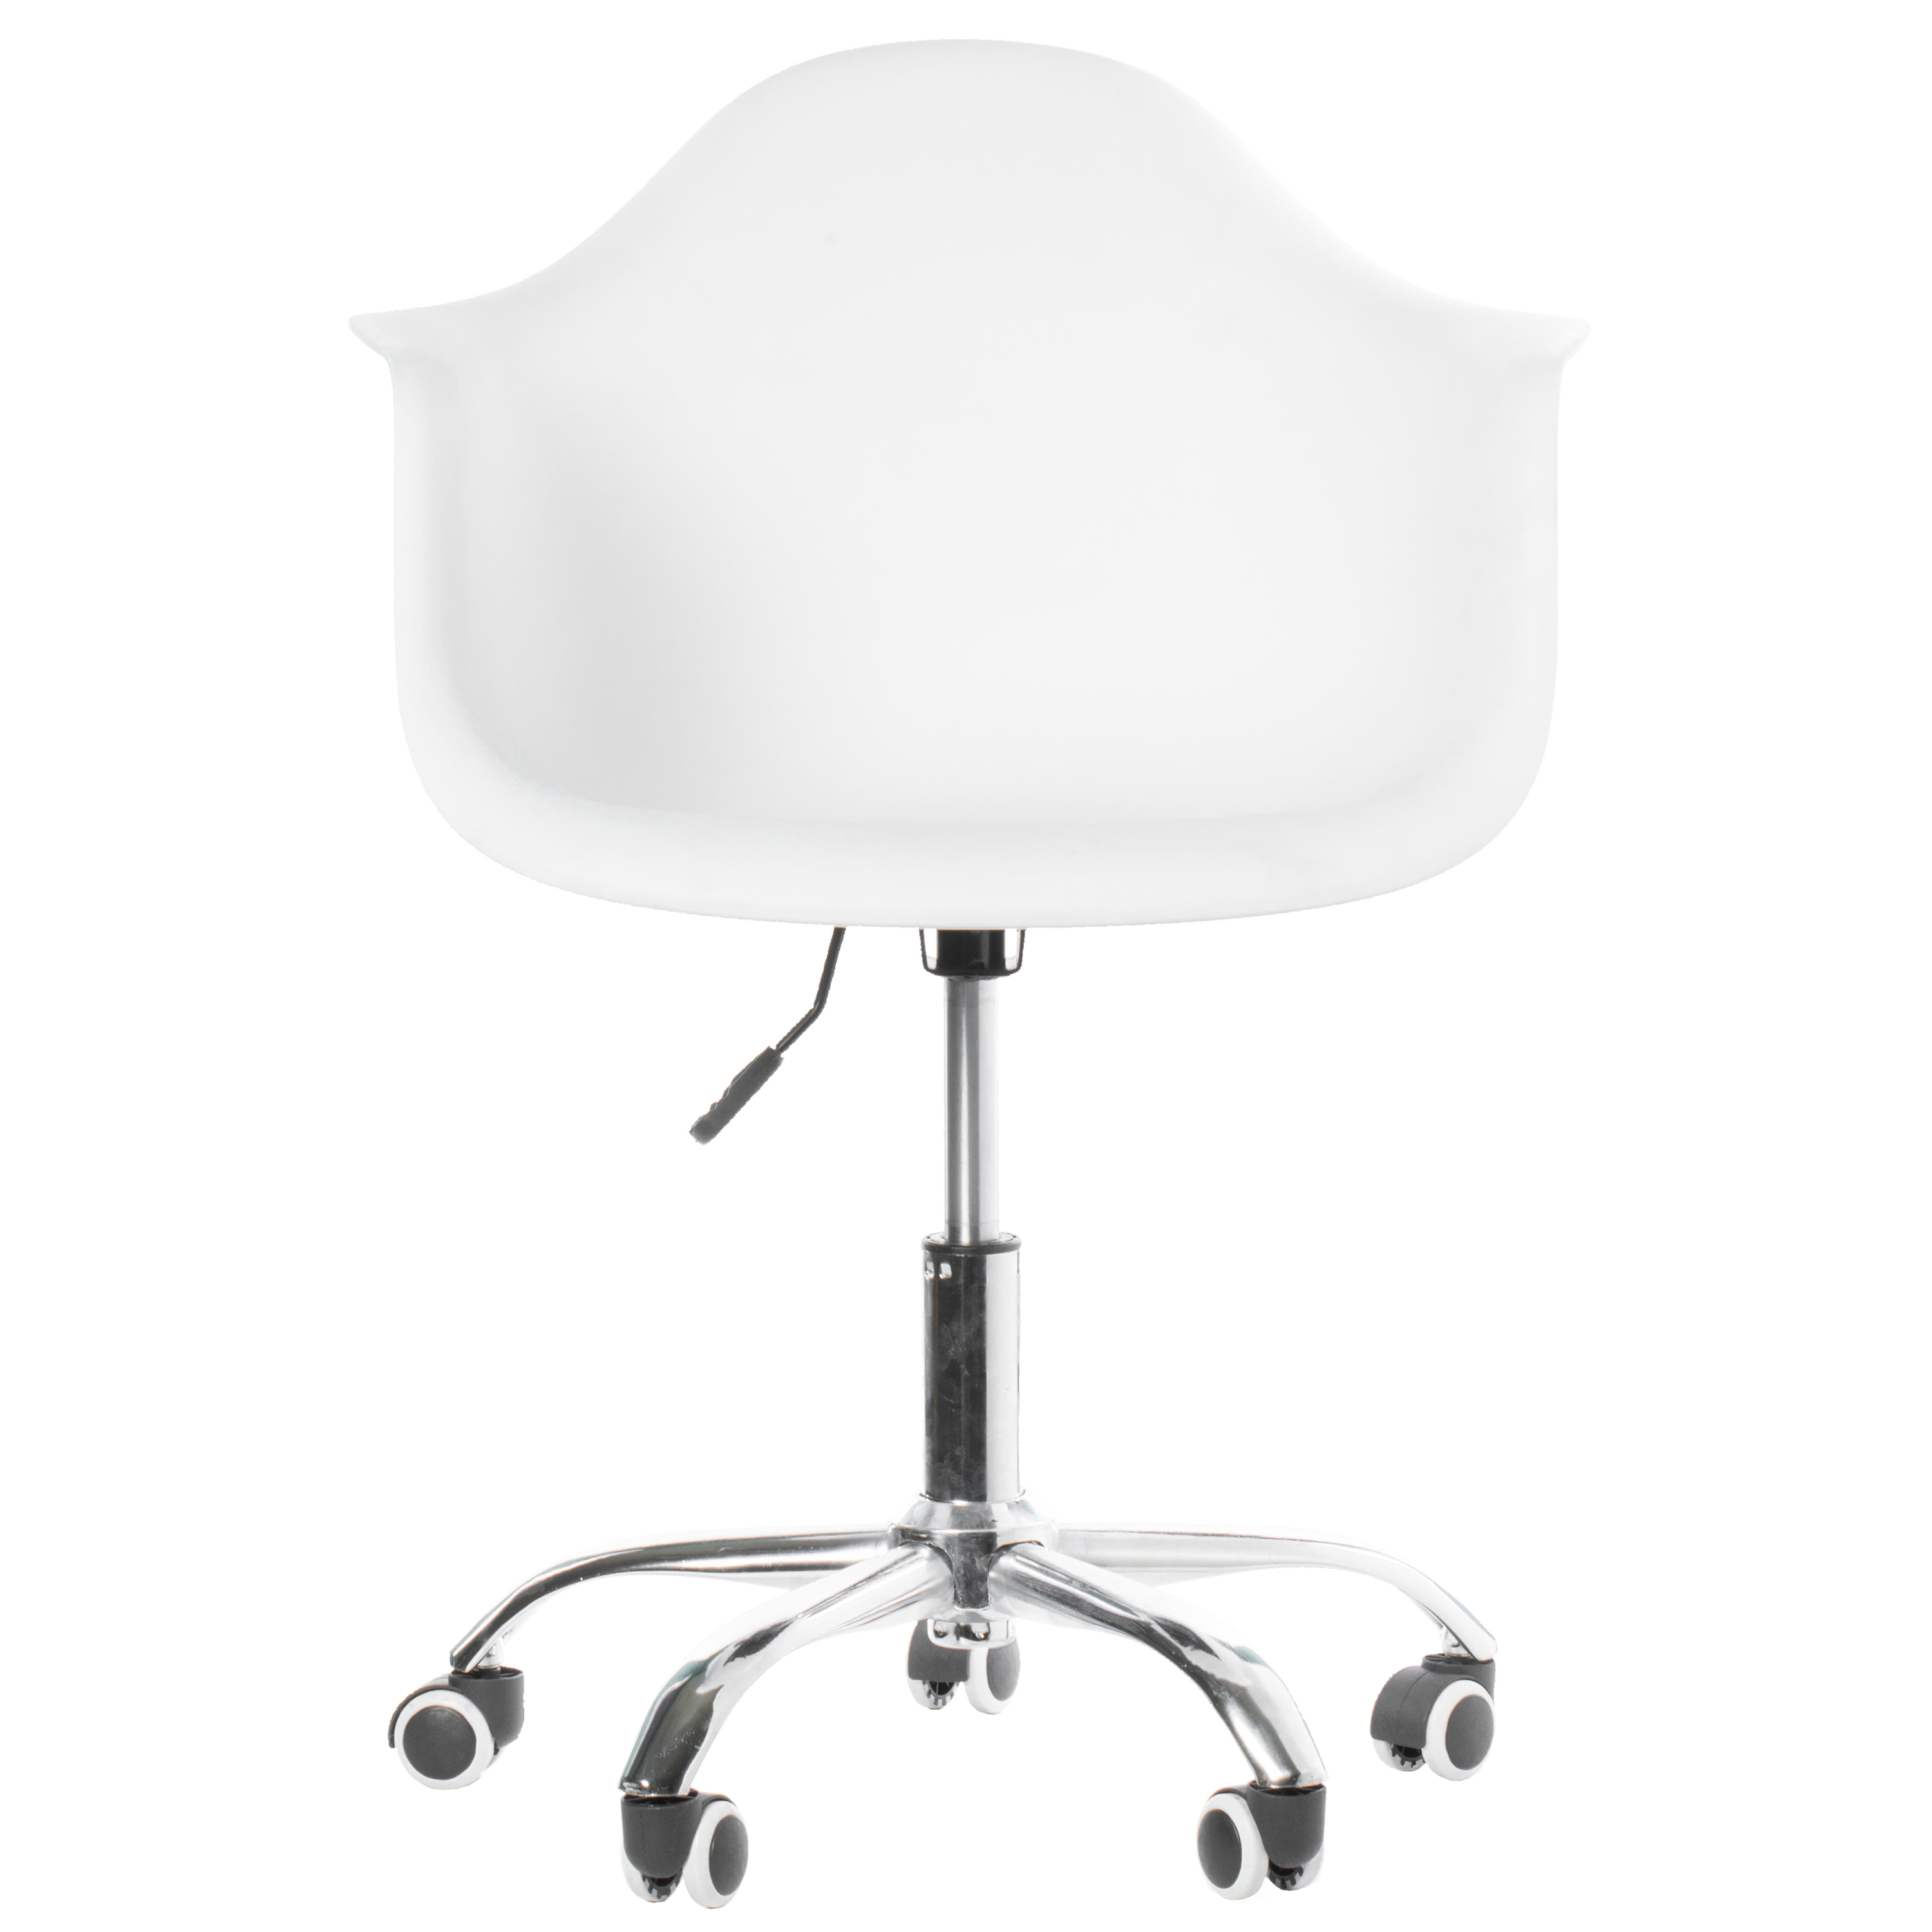 Mid-Century Modern Style Swivel Plastic Shell Molded Office Task Chair With Rolling Wheels - White